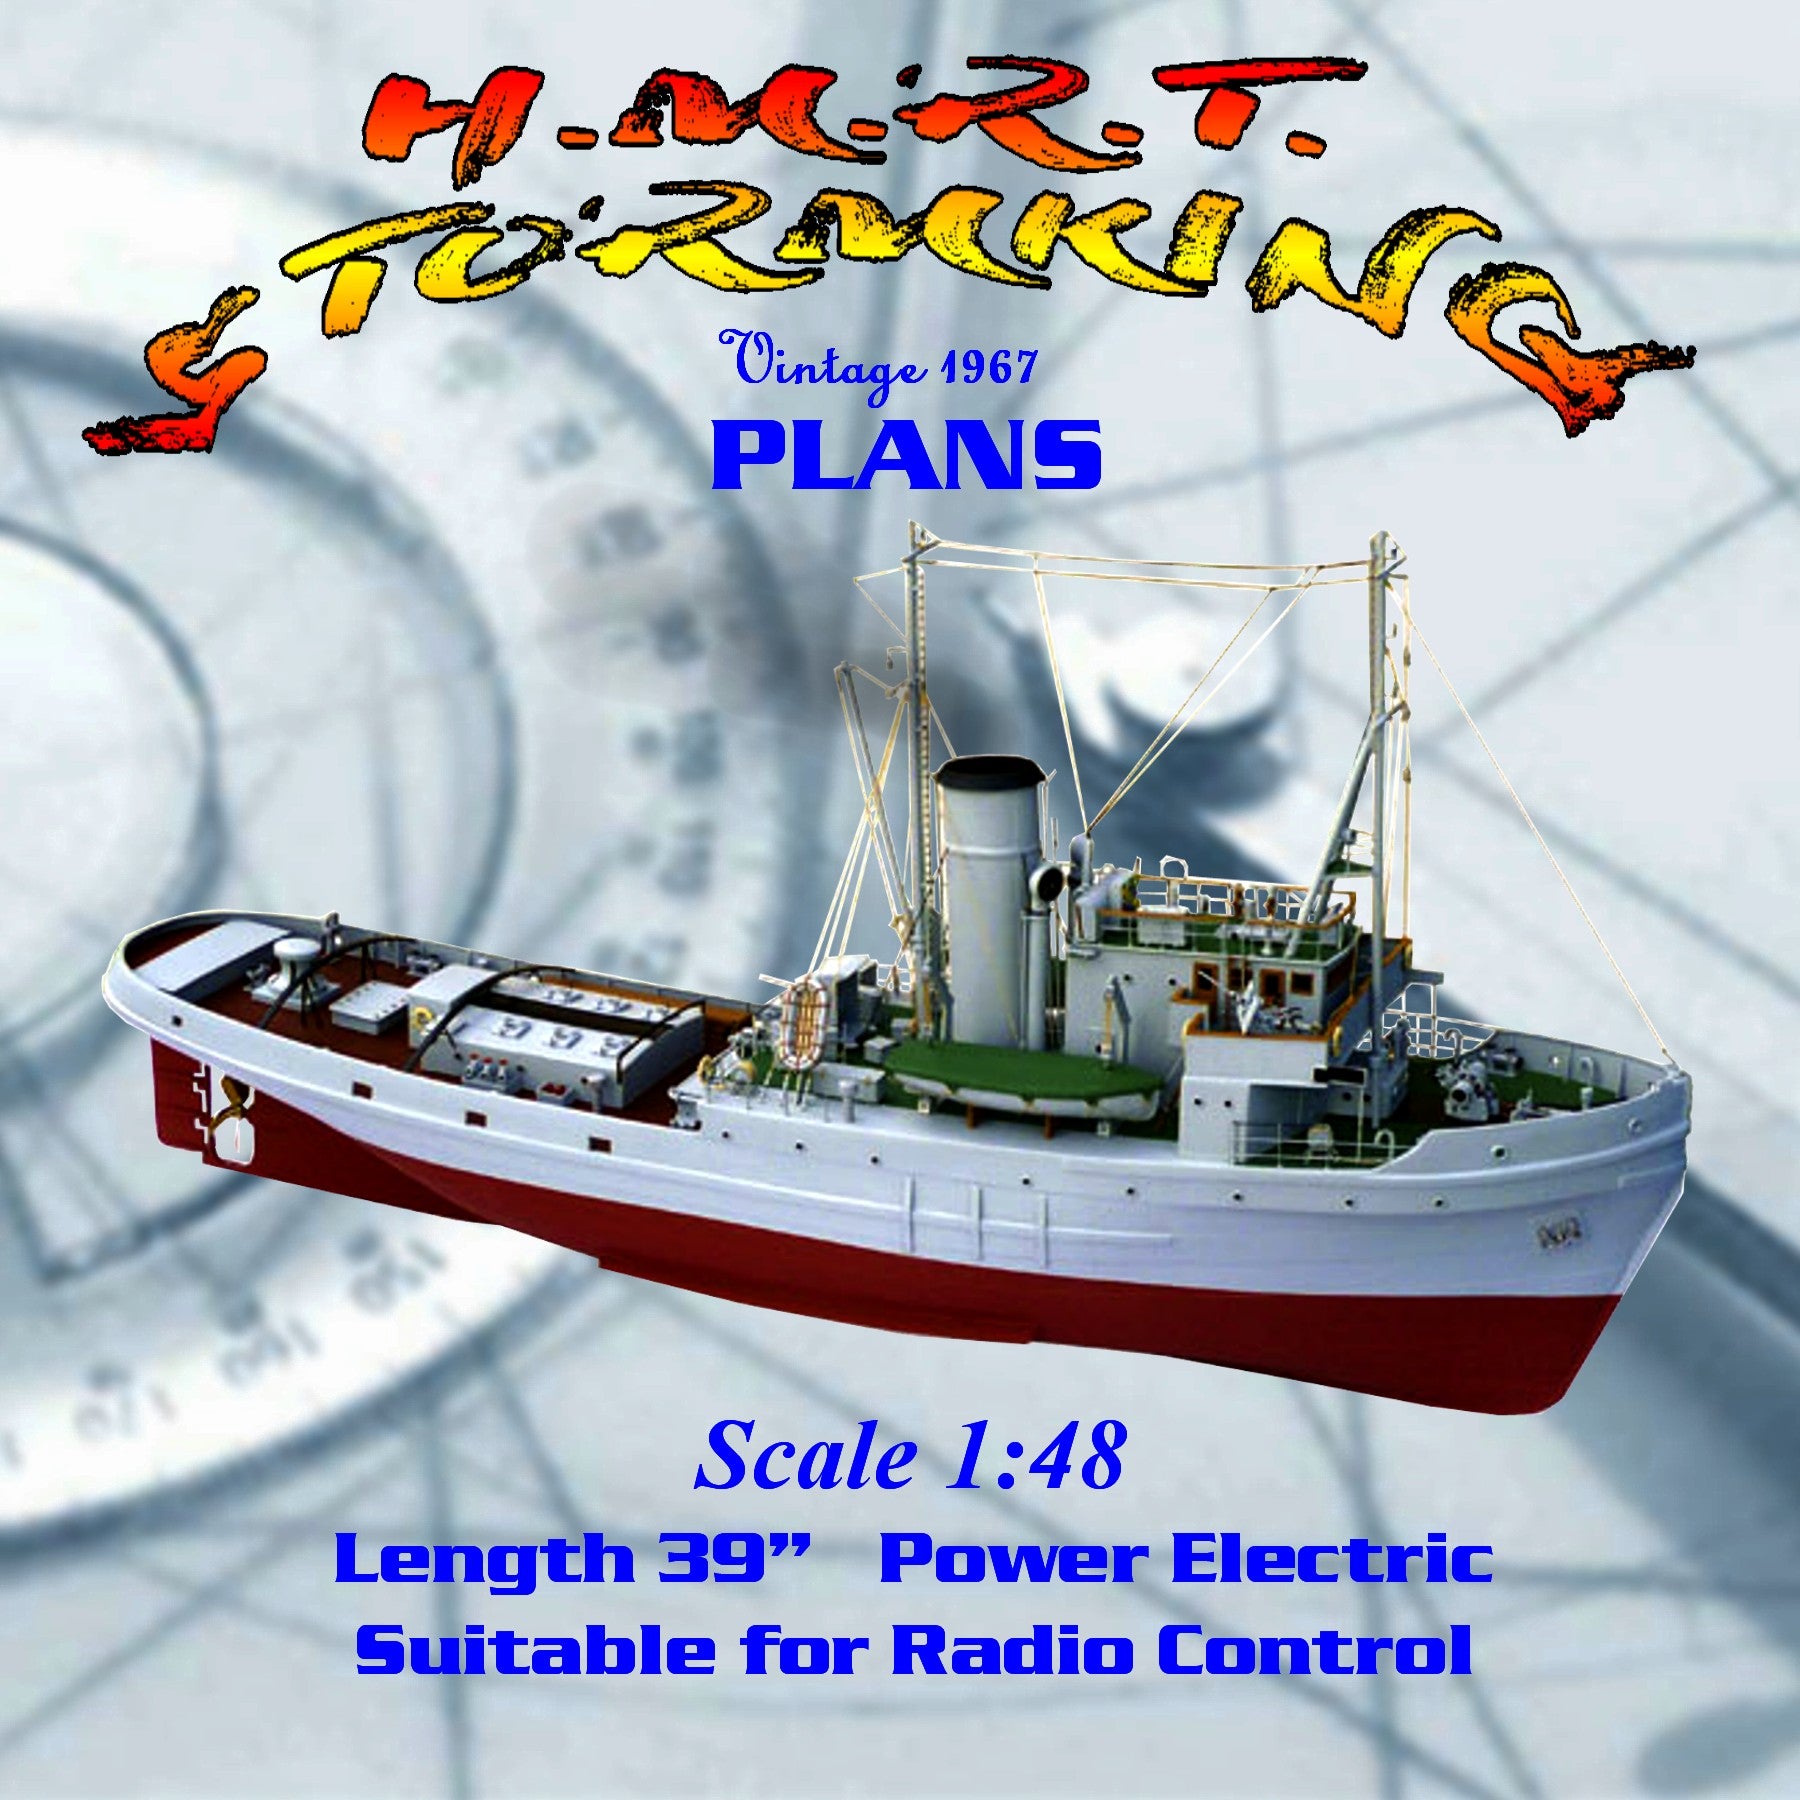 full size printed plan 1/48 scale 39"class assurance escort & rescue tug